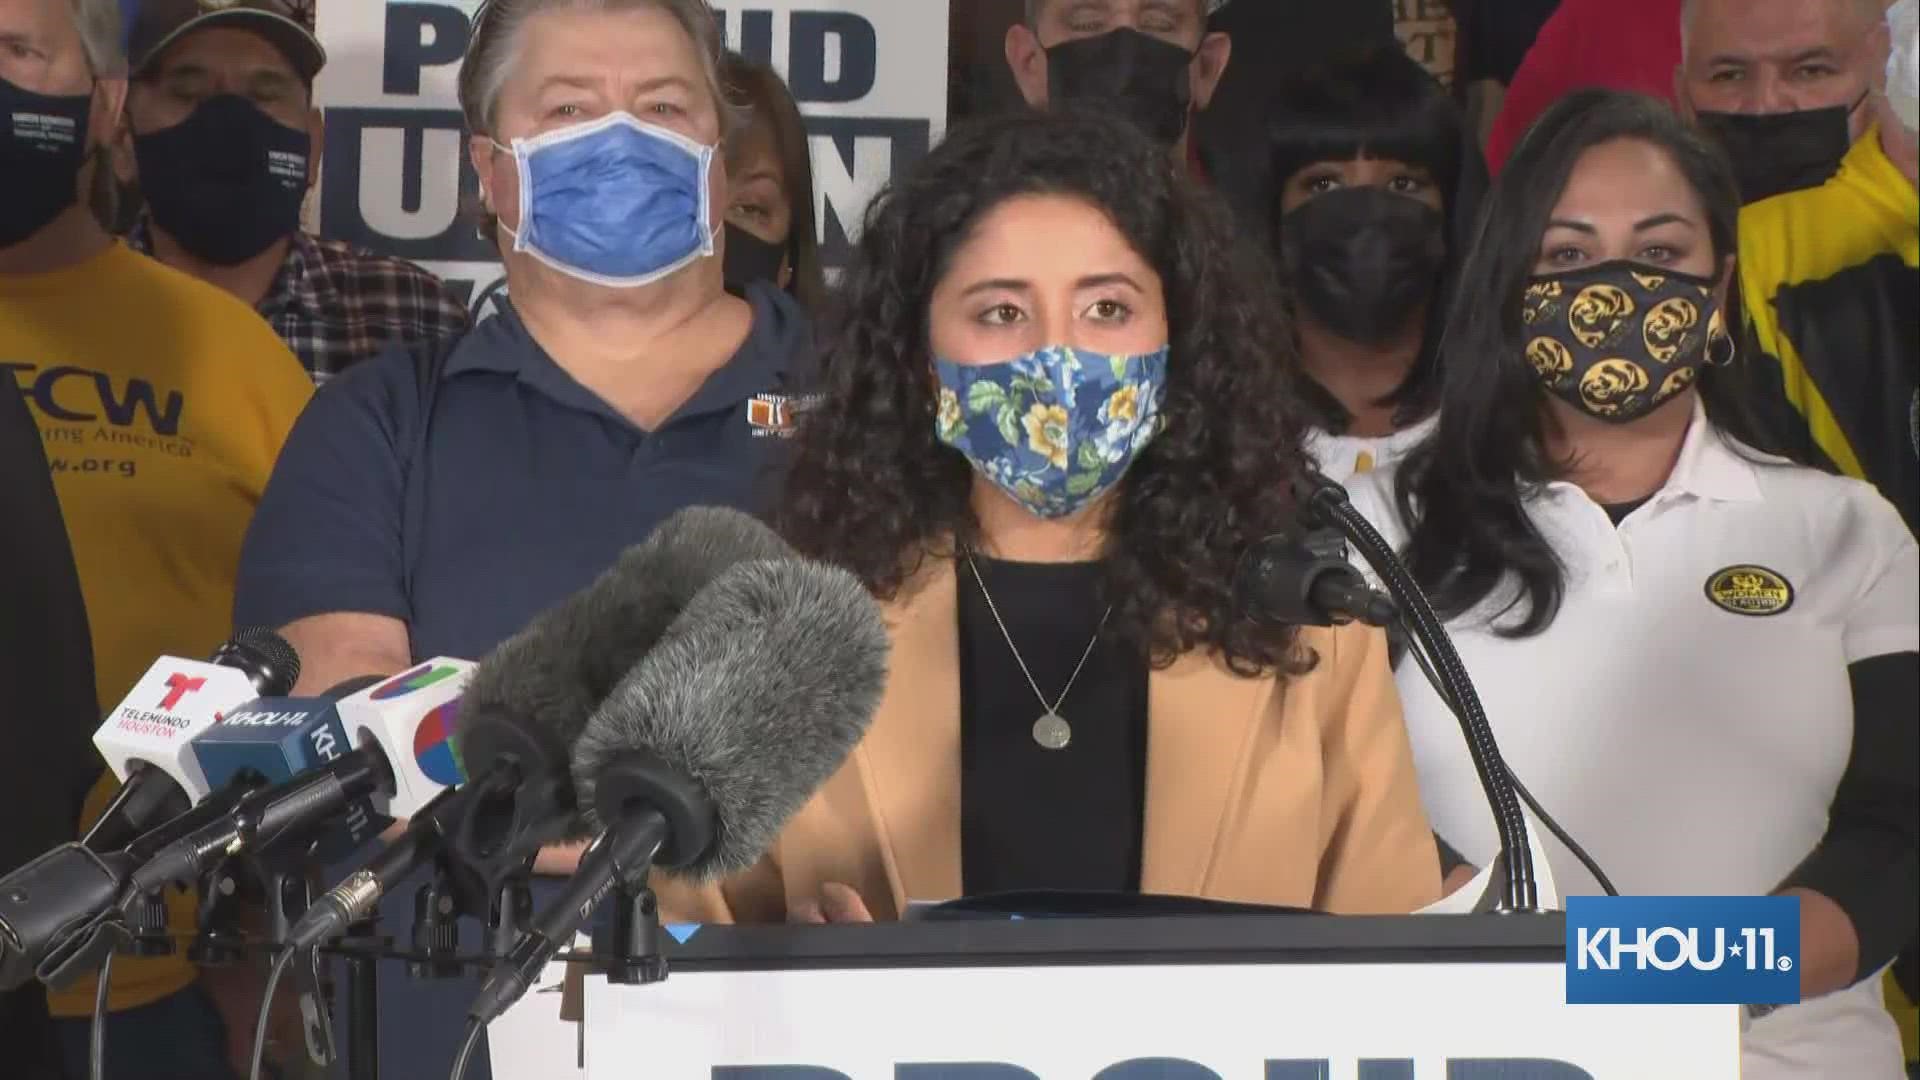 Harris County Judge Lina Hidalgo confirmed a man in his 50s has died after contracting the omicron COVID variant. The man was not vaccinated, Hidalgo said.